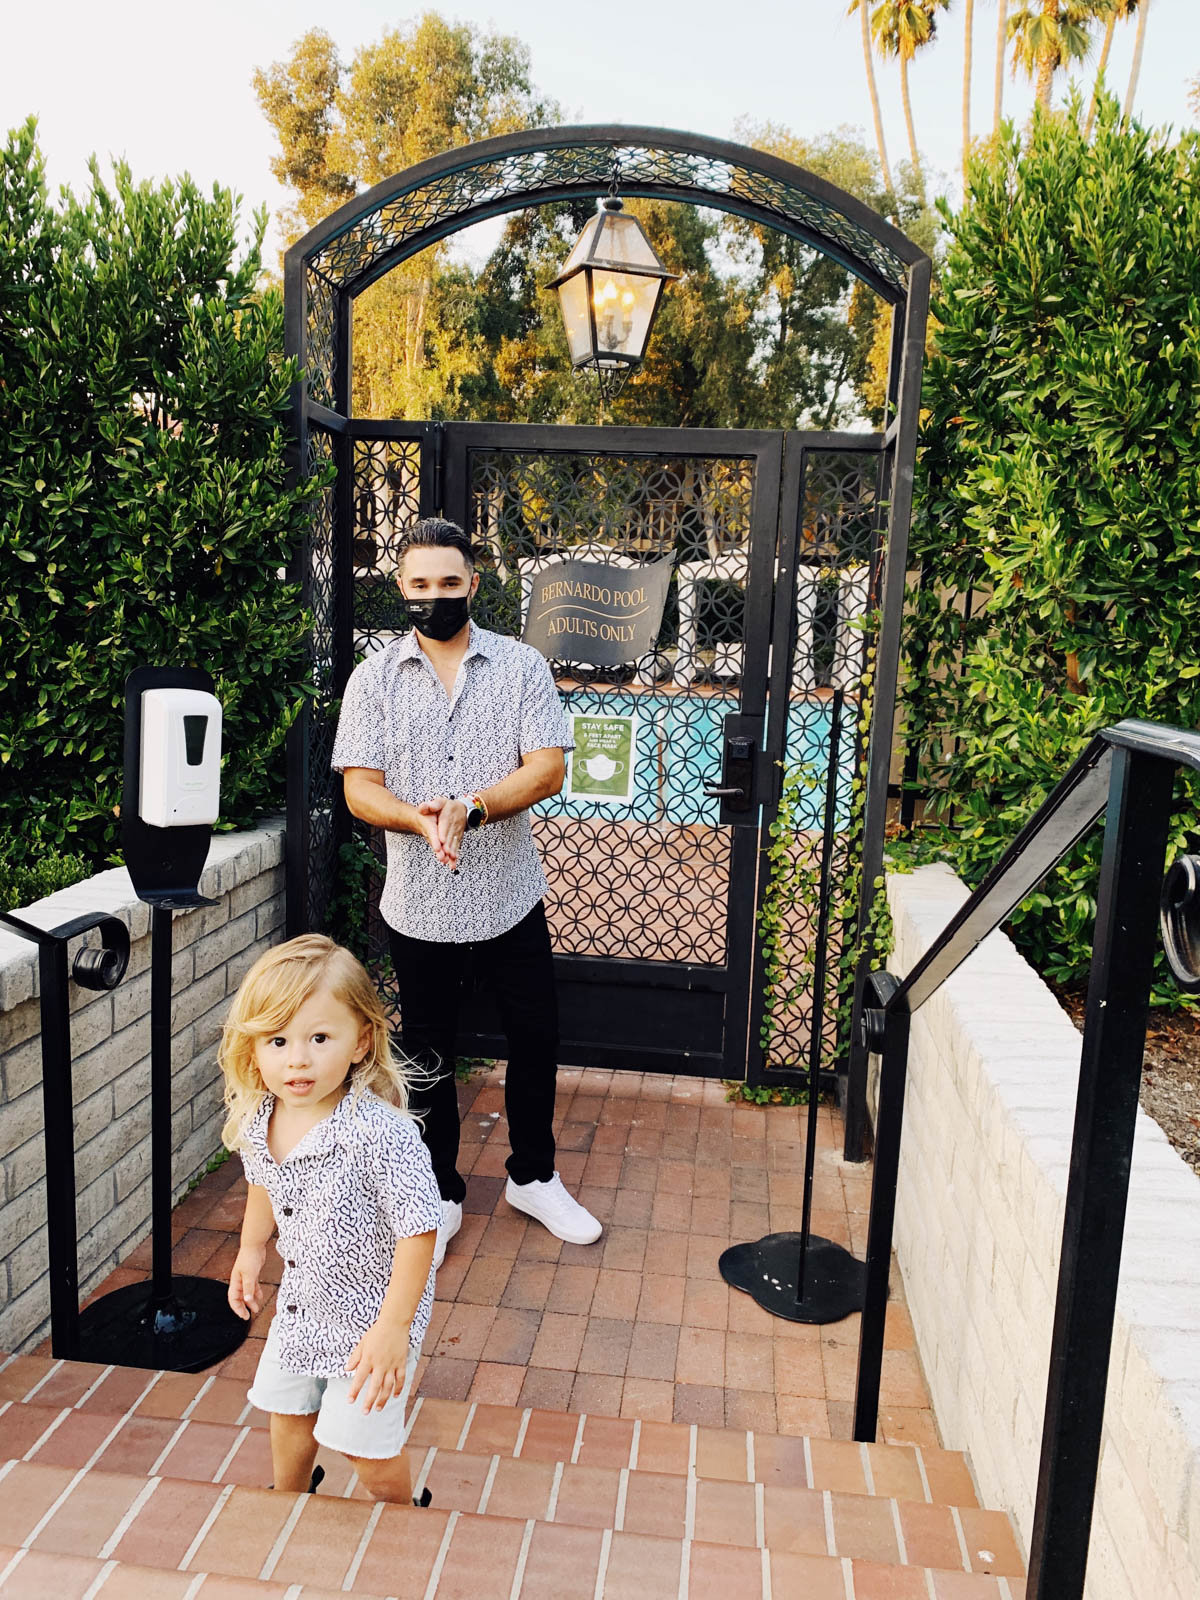 eatsleepwear goes on a family trip with toddler to Rancho Bernardo Inn showing father and son and covid safety protocols